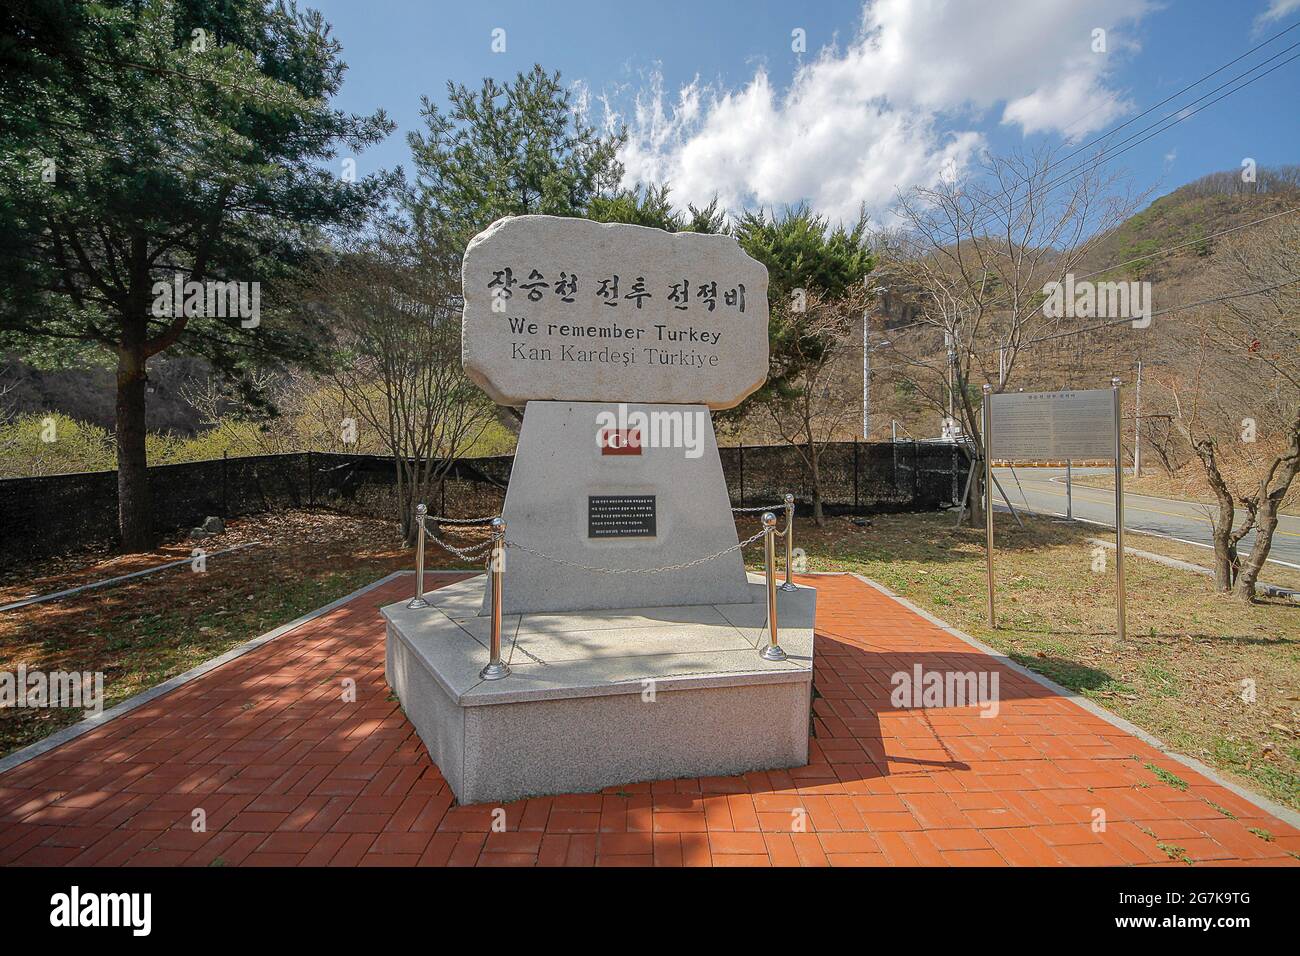 April 11, 2018-Goyang, South Korea-A View of Jangseung chun battle memoris monument at Cheorwon, South Korea. The JangseungChun Battle was the successful operation conducted from the 22nd to the 23rd of April 1951. It was executed by thte Turkish Army assigned to the 25th division of the U.S. Army. The operation was carried out in the operational area of the 5th division of South Korea today. The Jangseungchun battle is named by citing thte name of Jang Seung Stream which flows through the Dong-mak valley. It is sorrowful, however that 65 died, 105 were missing and 35 were wounded in the battl Stock Photo